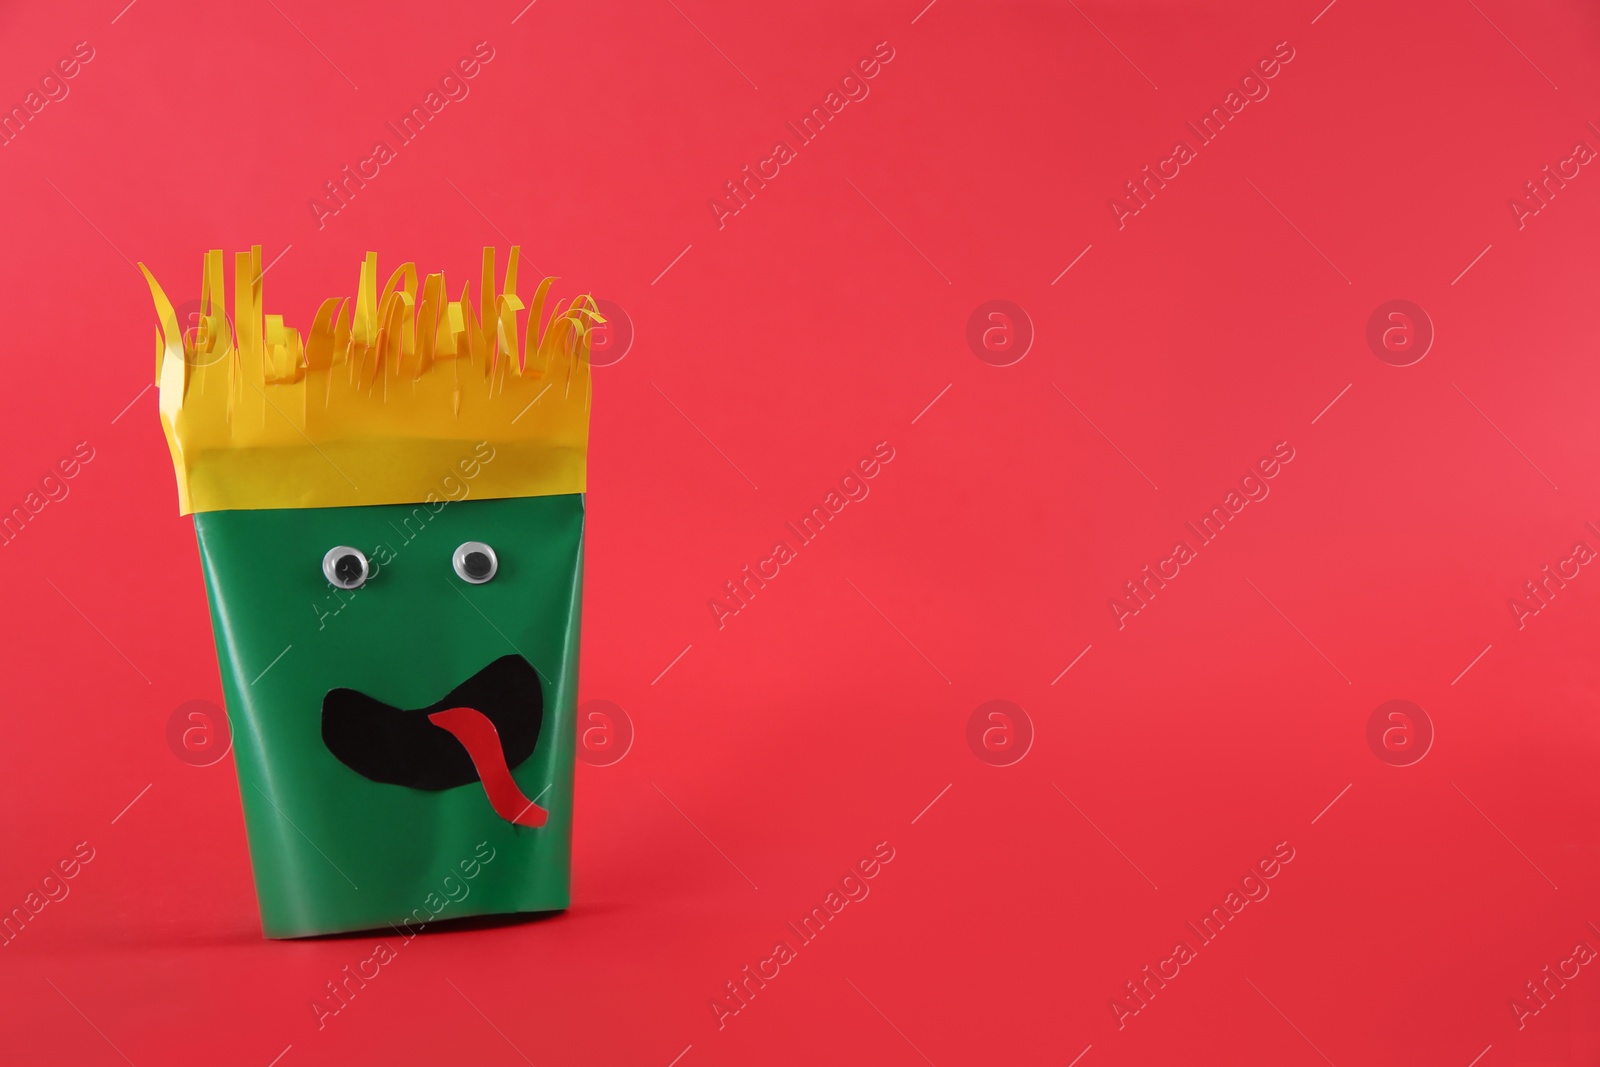 Photo of Funny green monster on red background, space for text. Halloween decoration